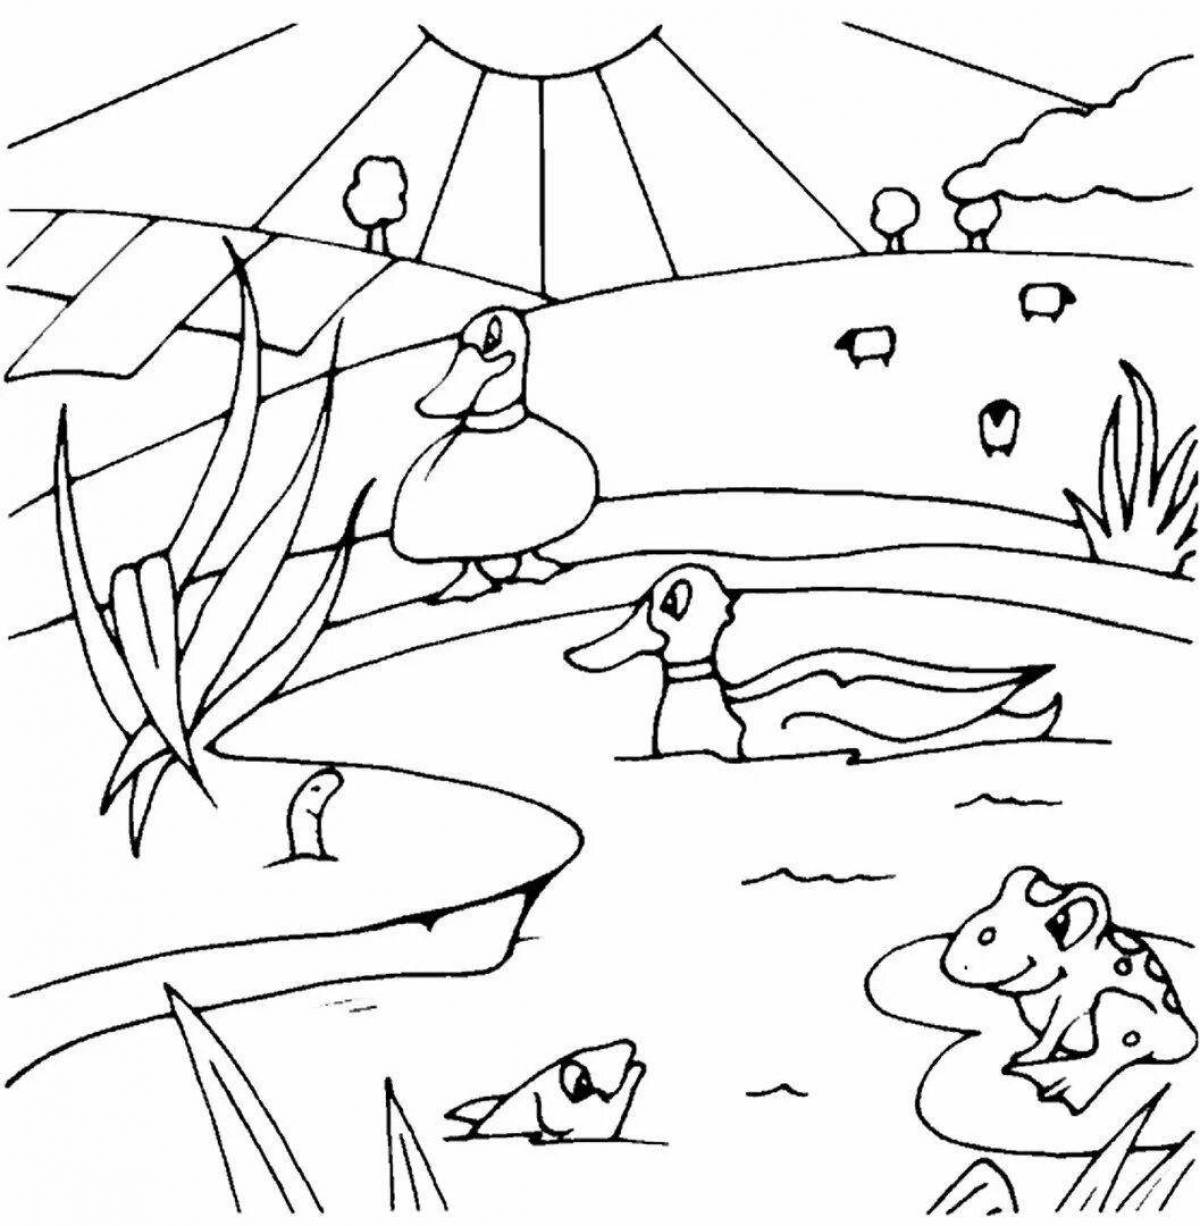 Witty travel frog coloring page for kids